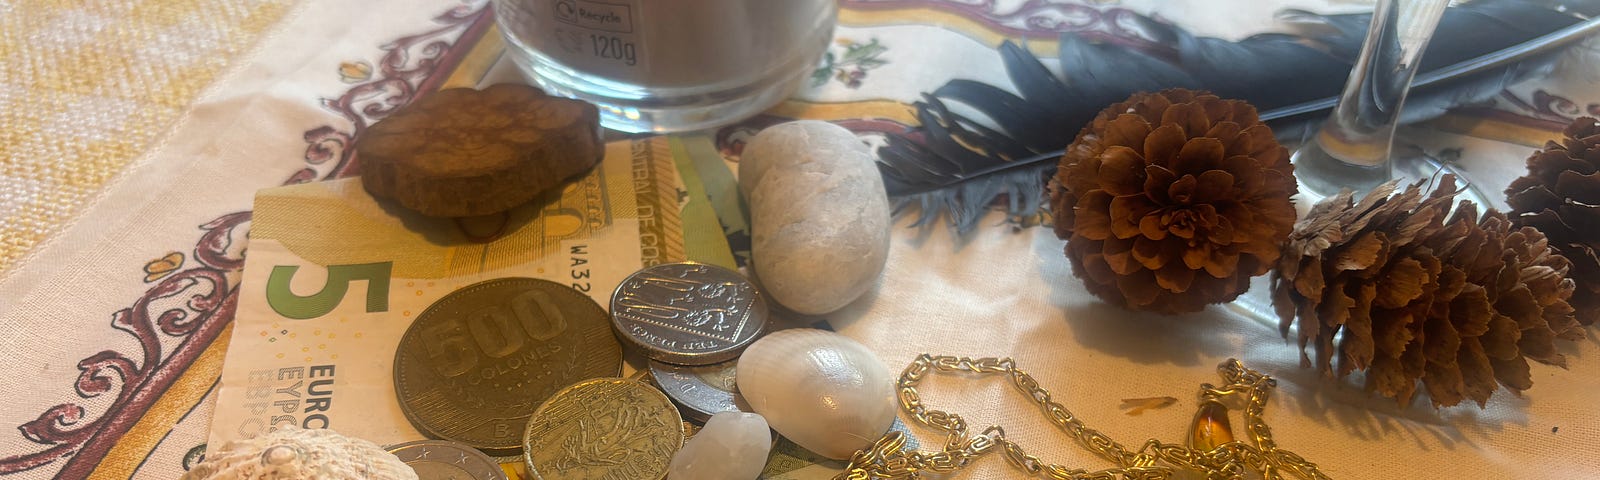 Currency among shells, crystals, jewels, tiny pine cones, a feather and a candle, representing abundance and freedom on the altar.